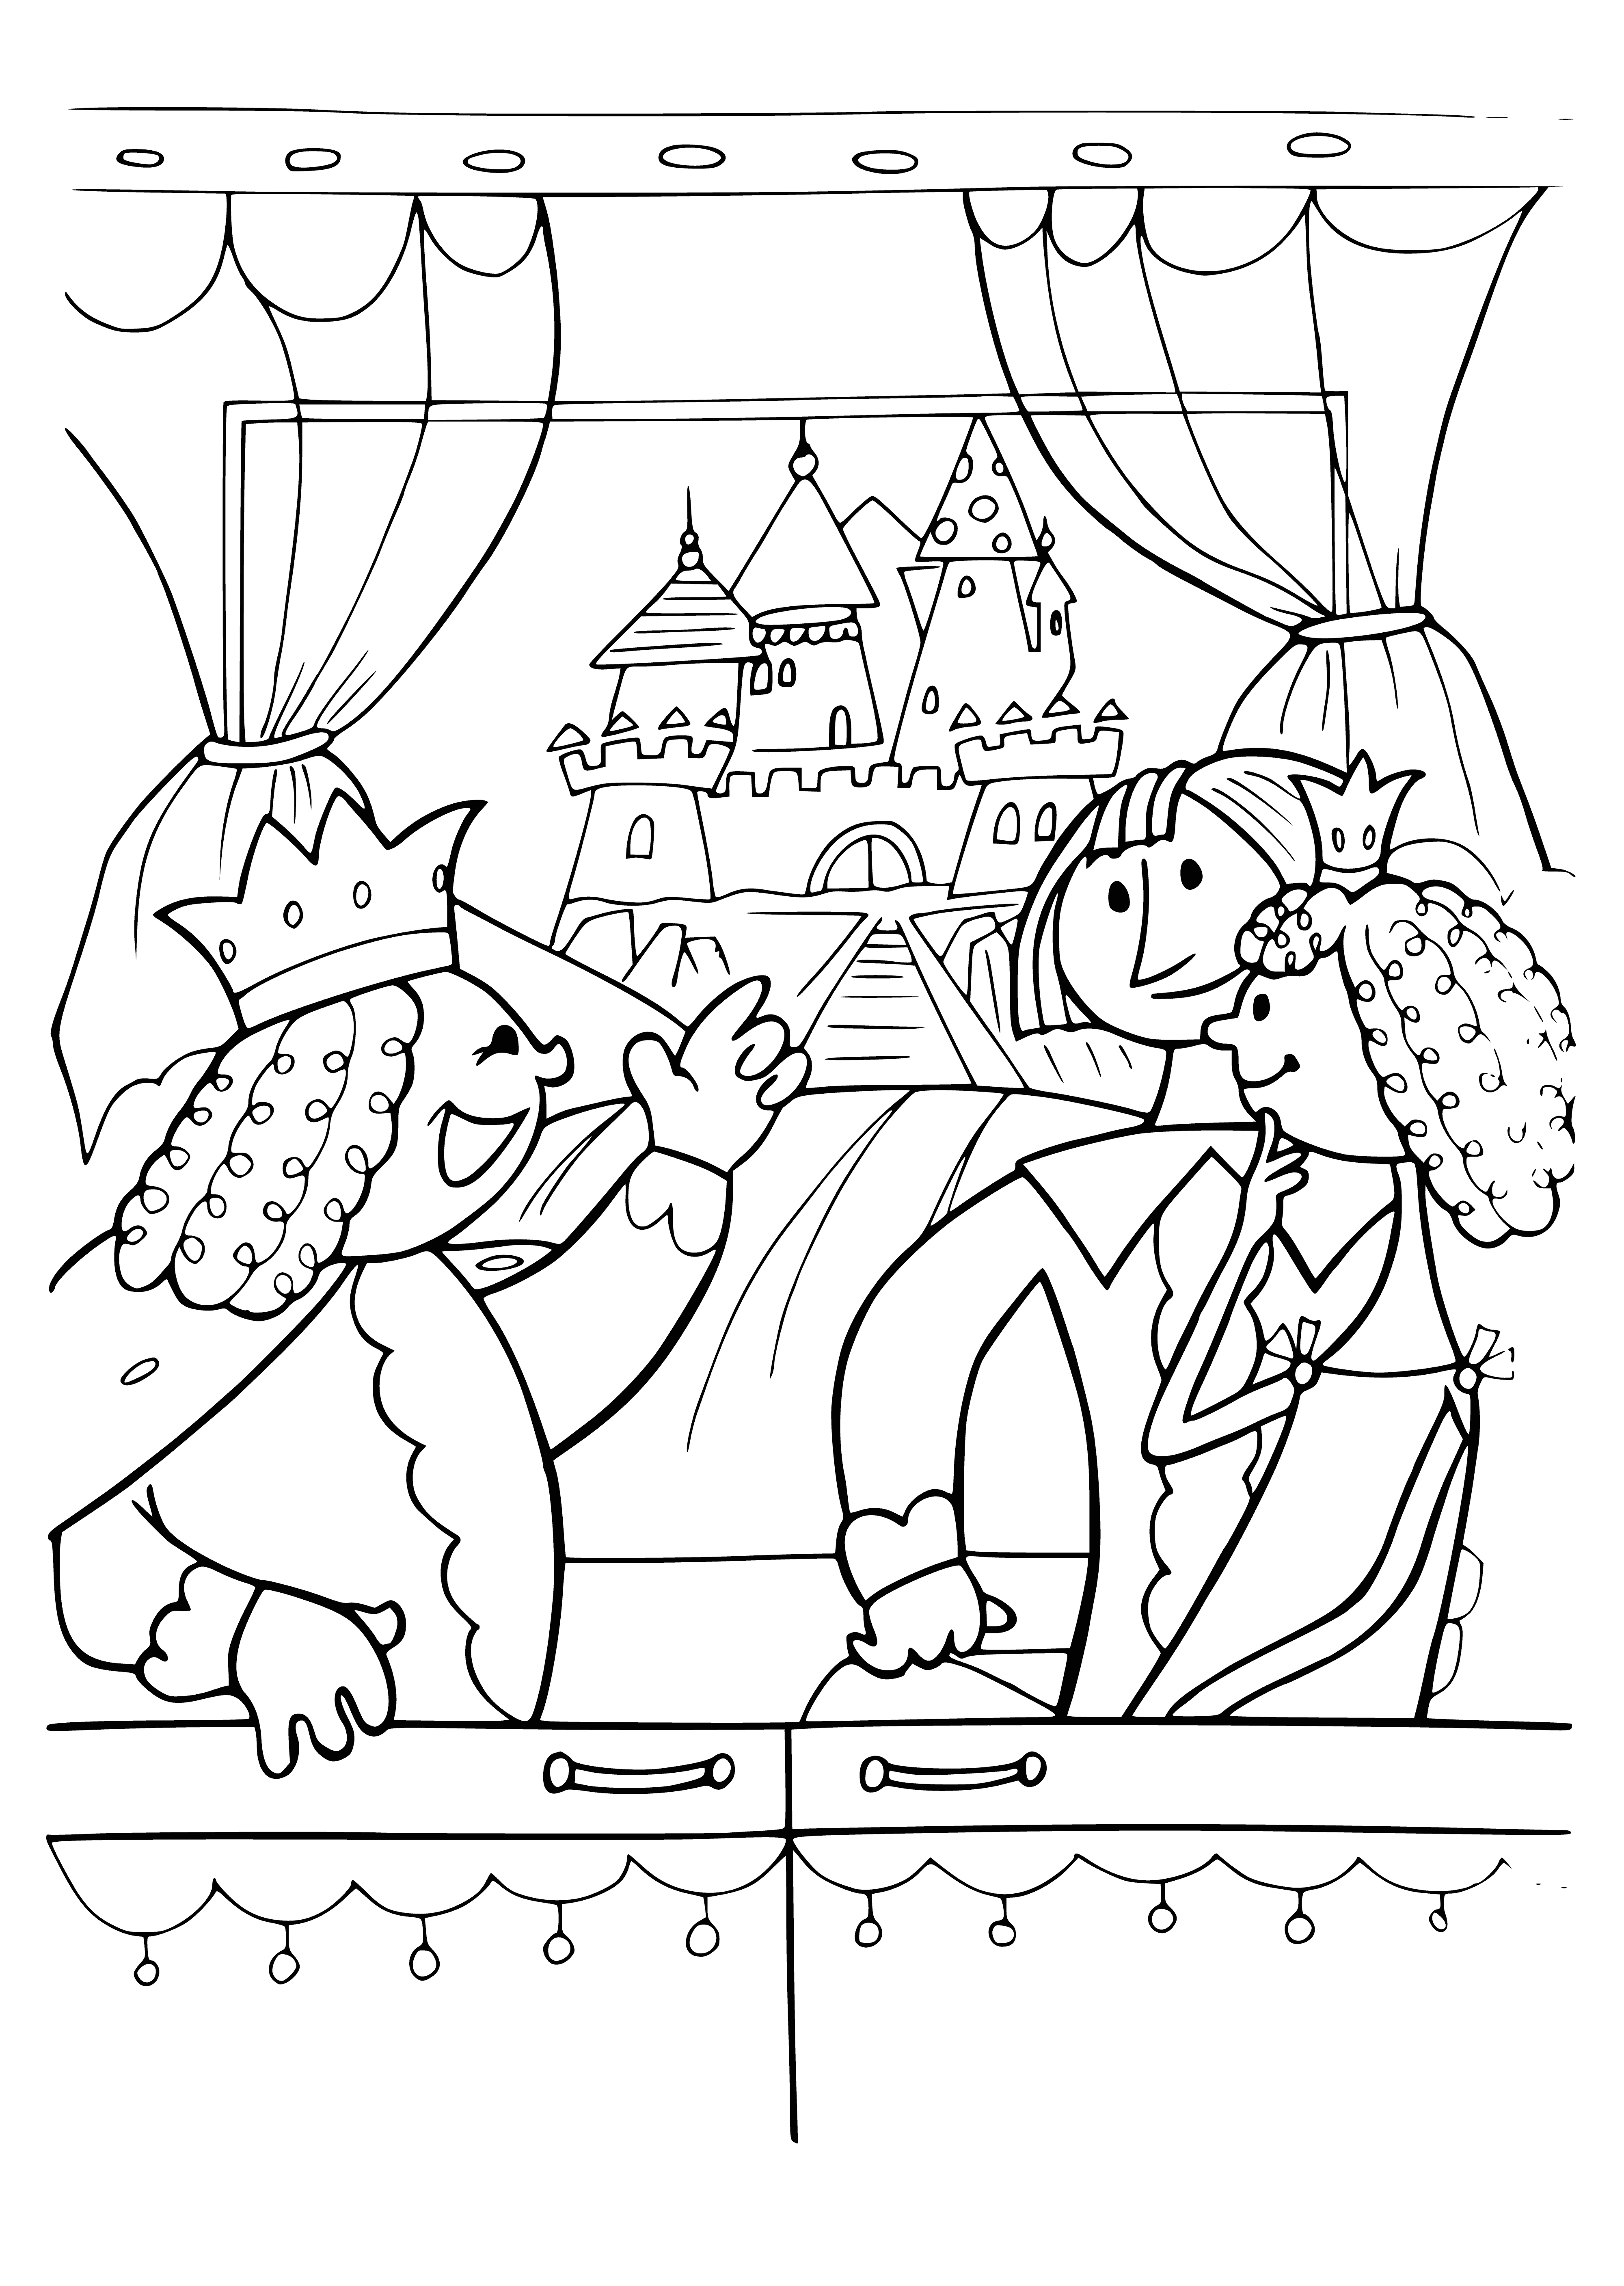 coloring page: Black cat in brown carriage w/ white collar & bell.